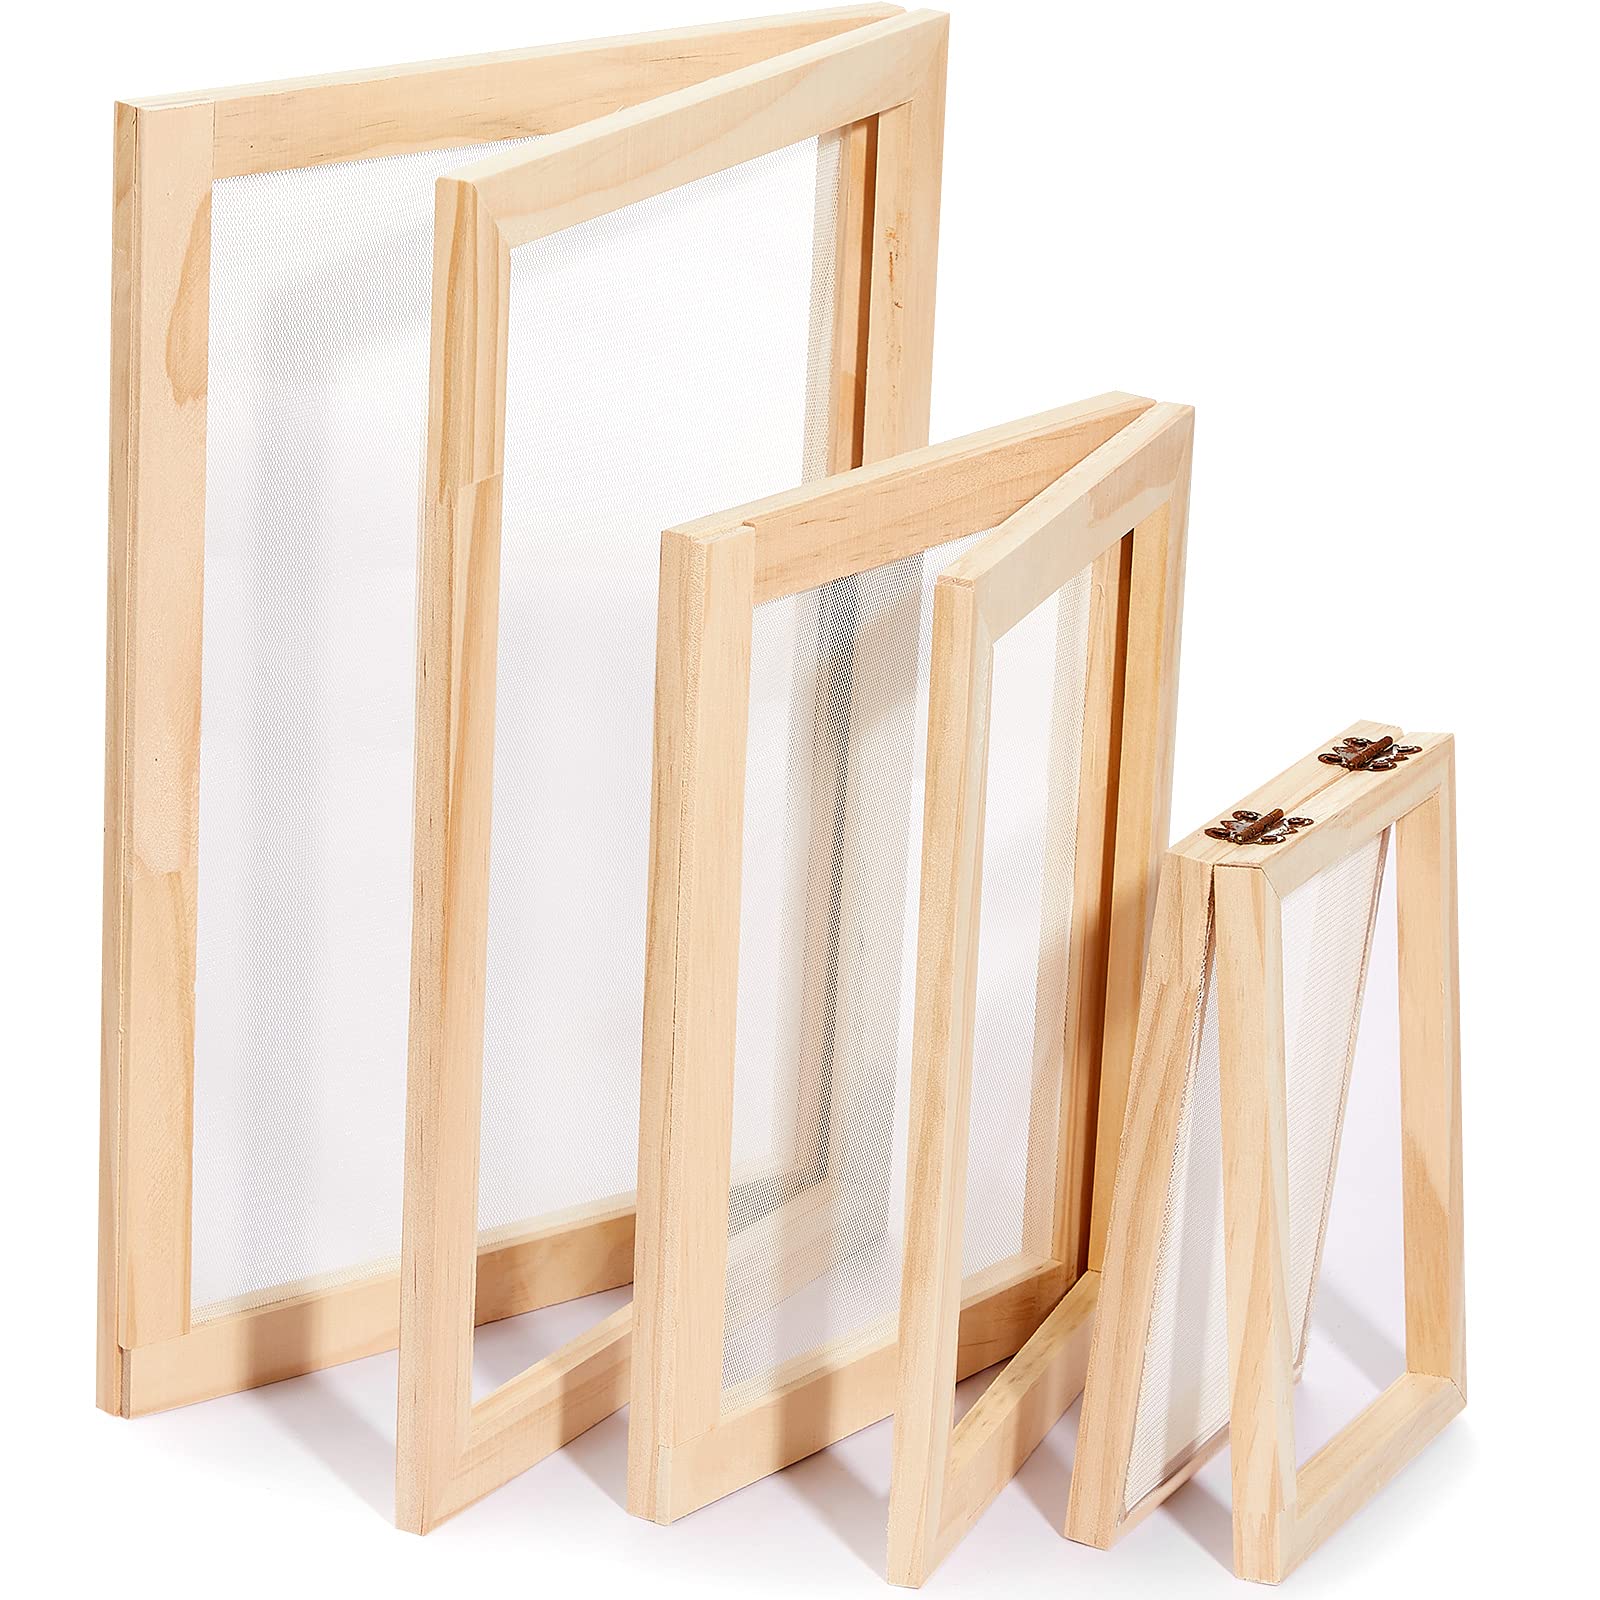 Honoson 3 Pieces Paper Making Wooden Paper Making Mould Papermaking Screen  Kit 3 Size Frame for DIY Paper Craft (5 x 7 Inches 7.5 x 9.8 Inches 9.8 x  13 Inches)